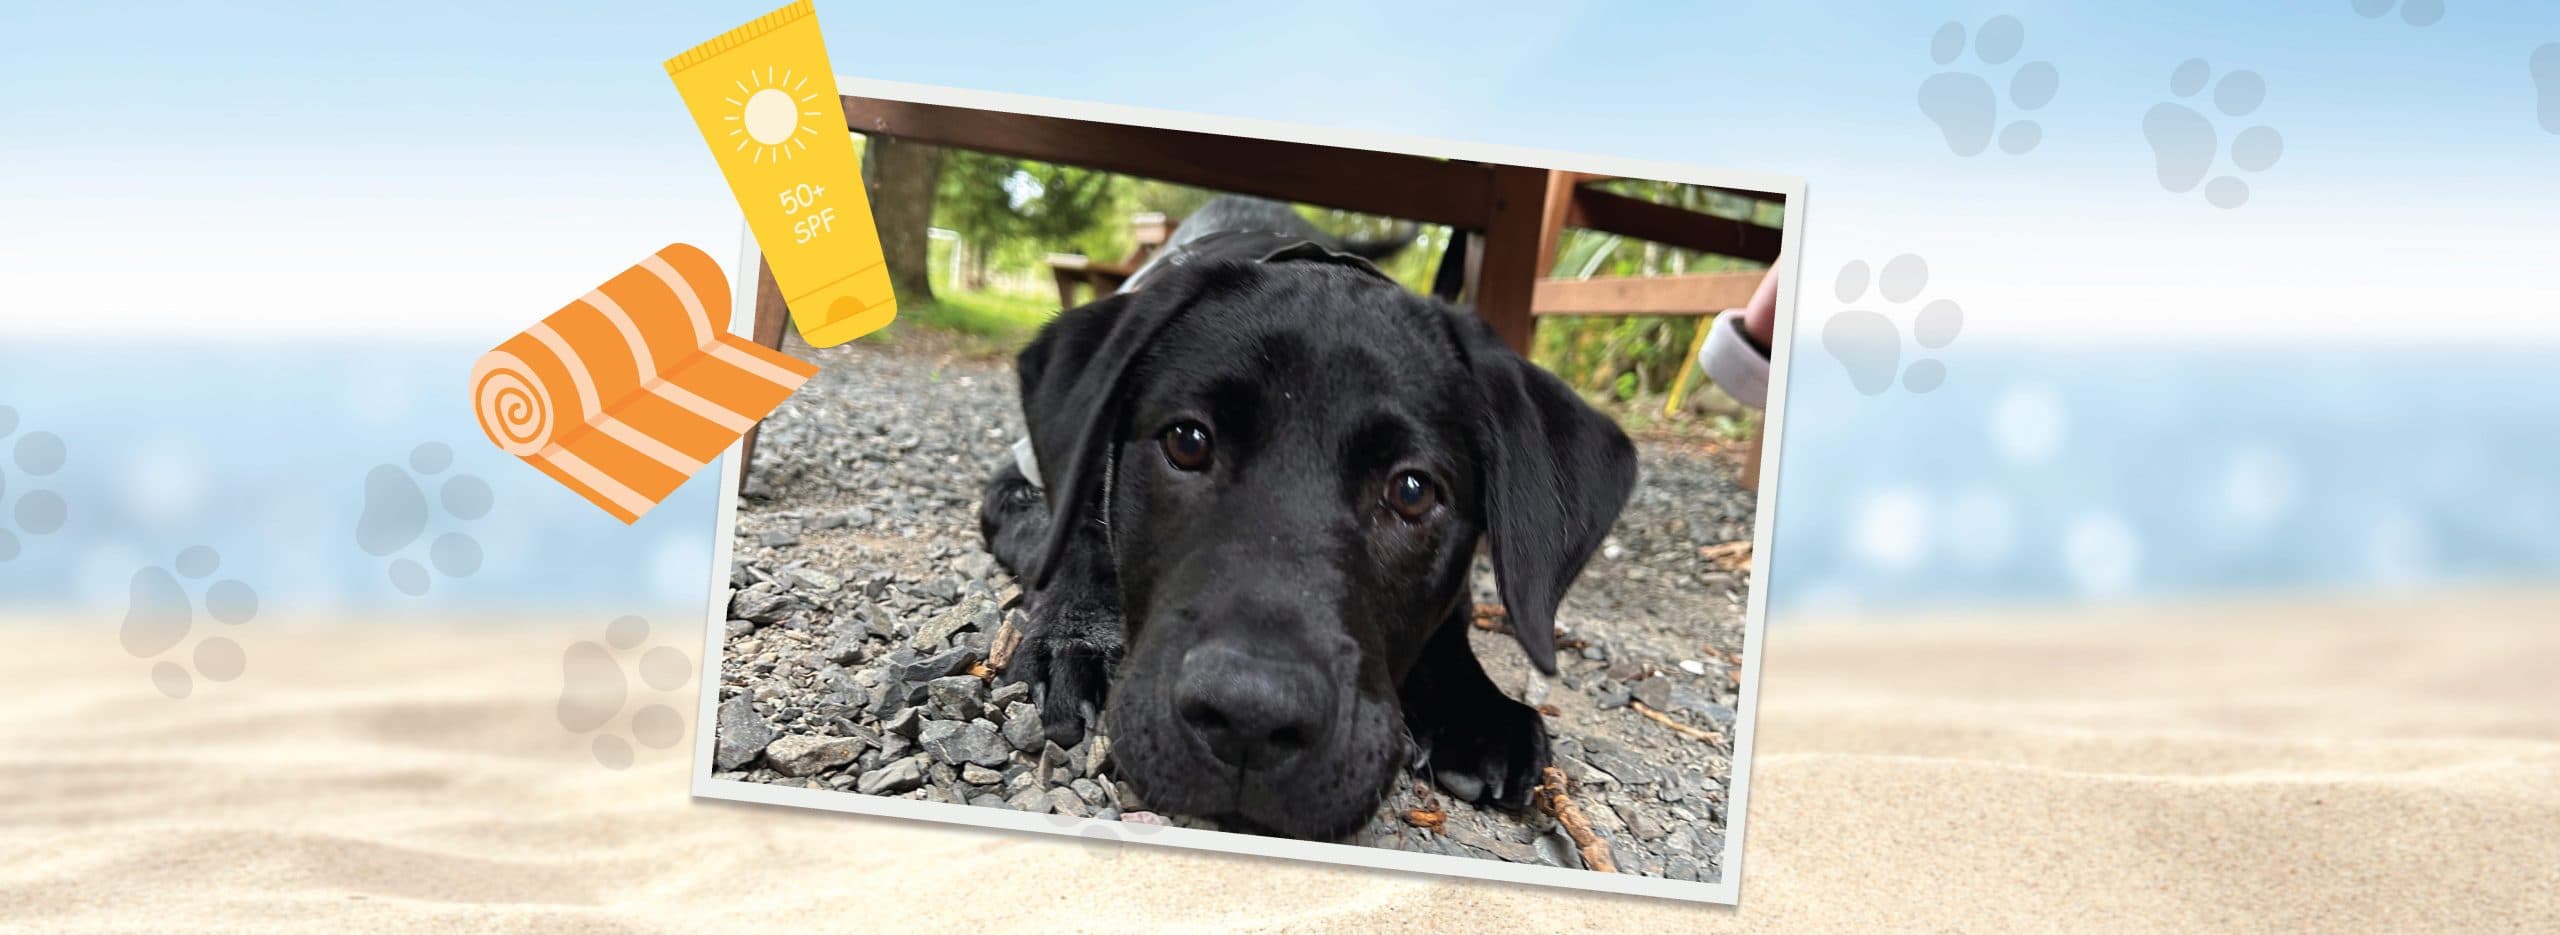 A black Labrador dog peeking out from under a bench, with a beach and ocean in the background. Illustrations of a tube of sunscreen and a rolled-up towel are digitally superimposed on the left side of the image.